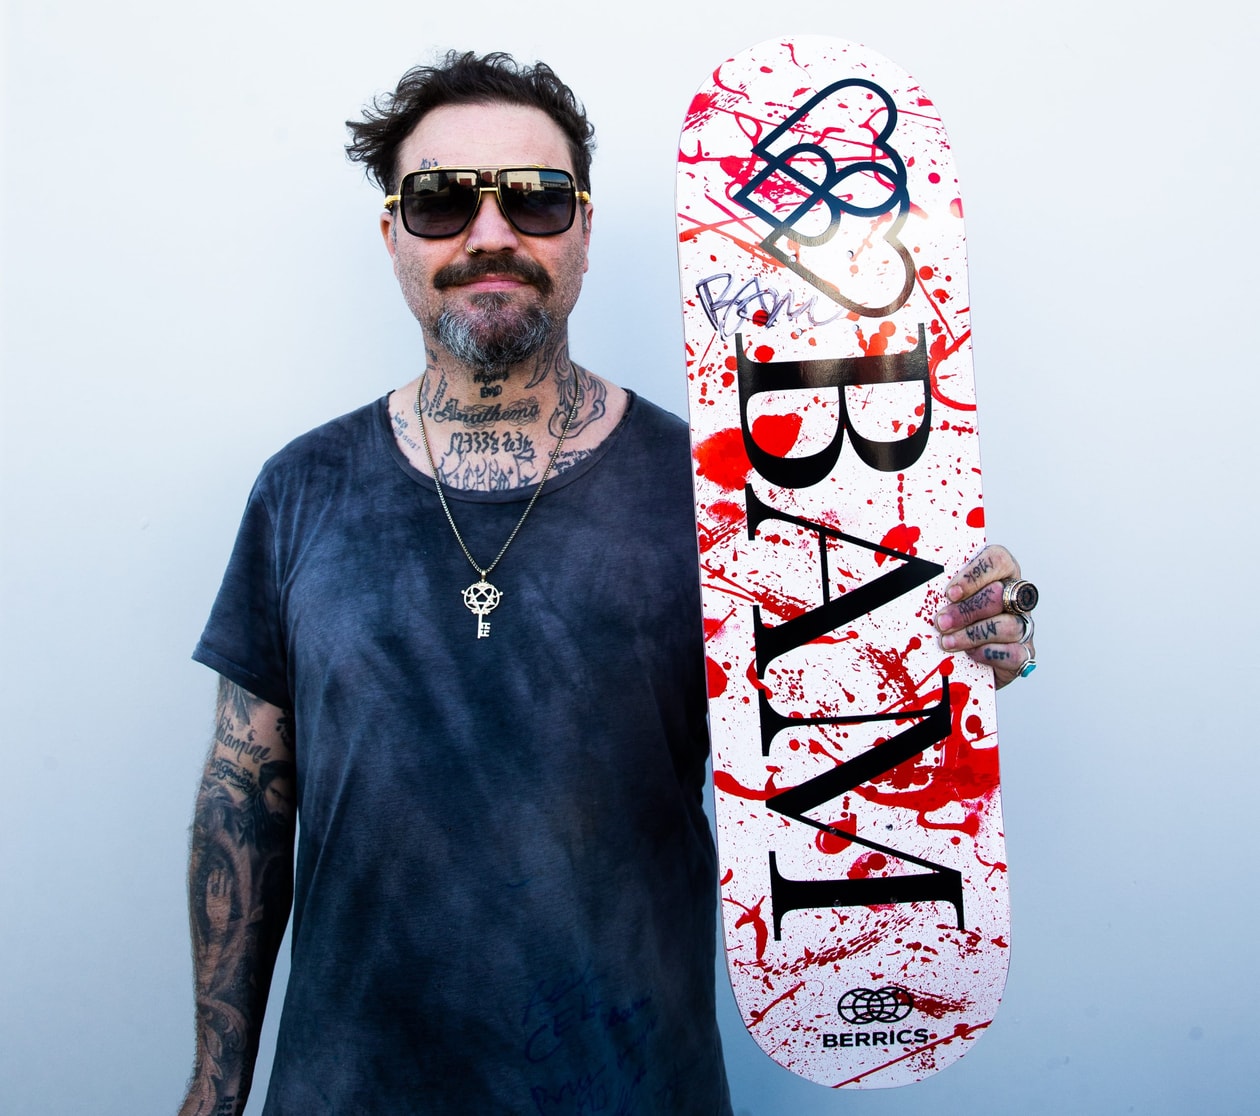 bam-margera-achieves-30-days-of-sobriety-and-returns-to-skateboarding